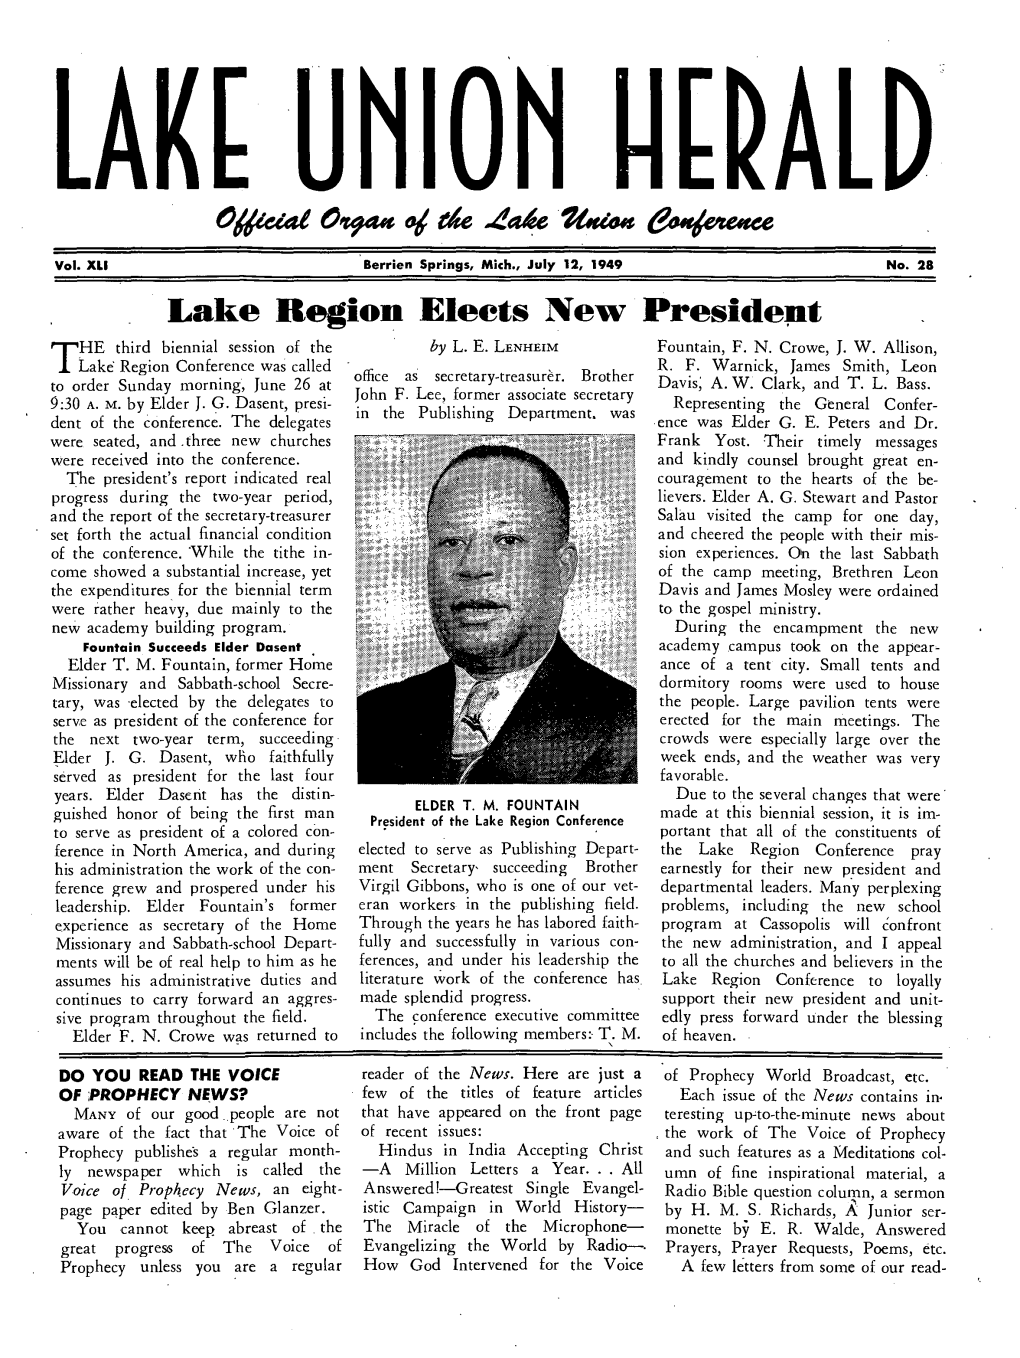 Lake Union Herald for 1949